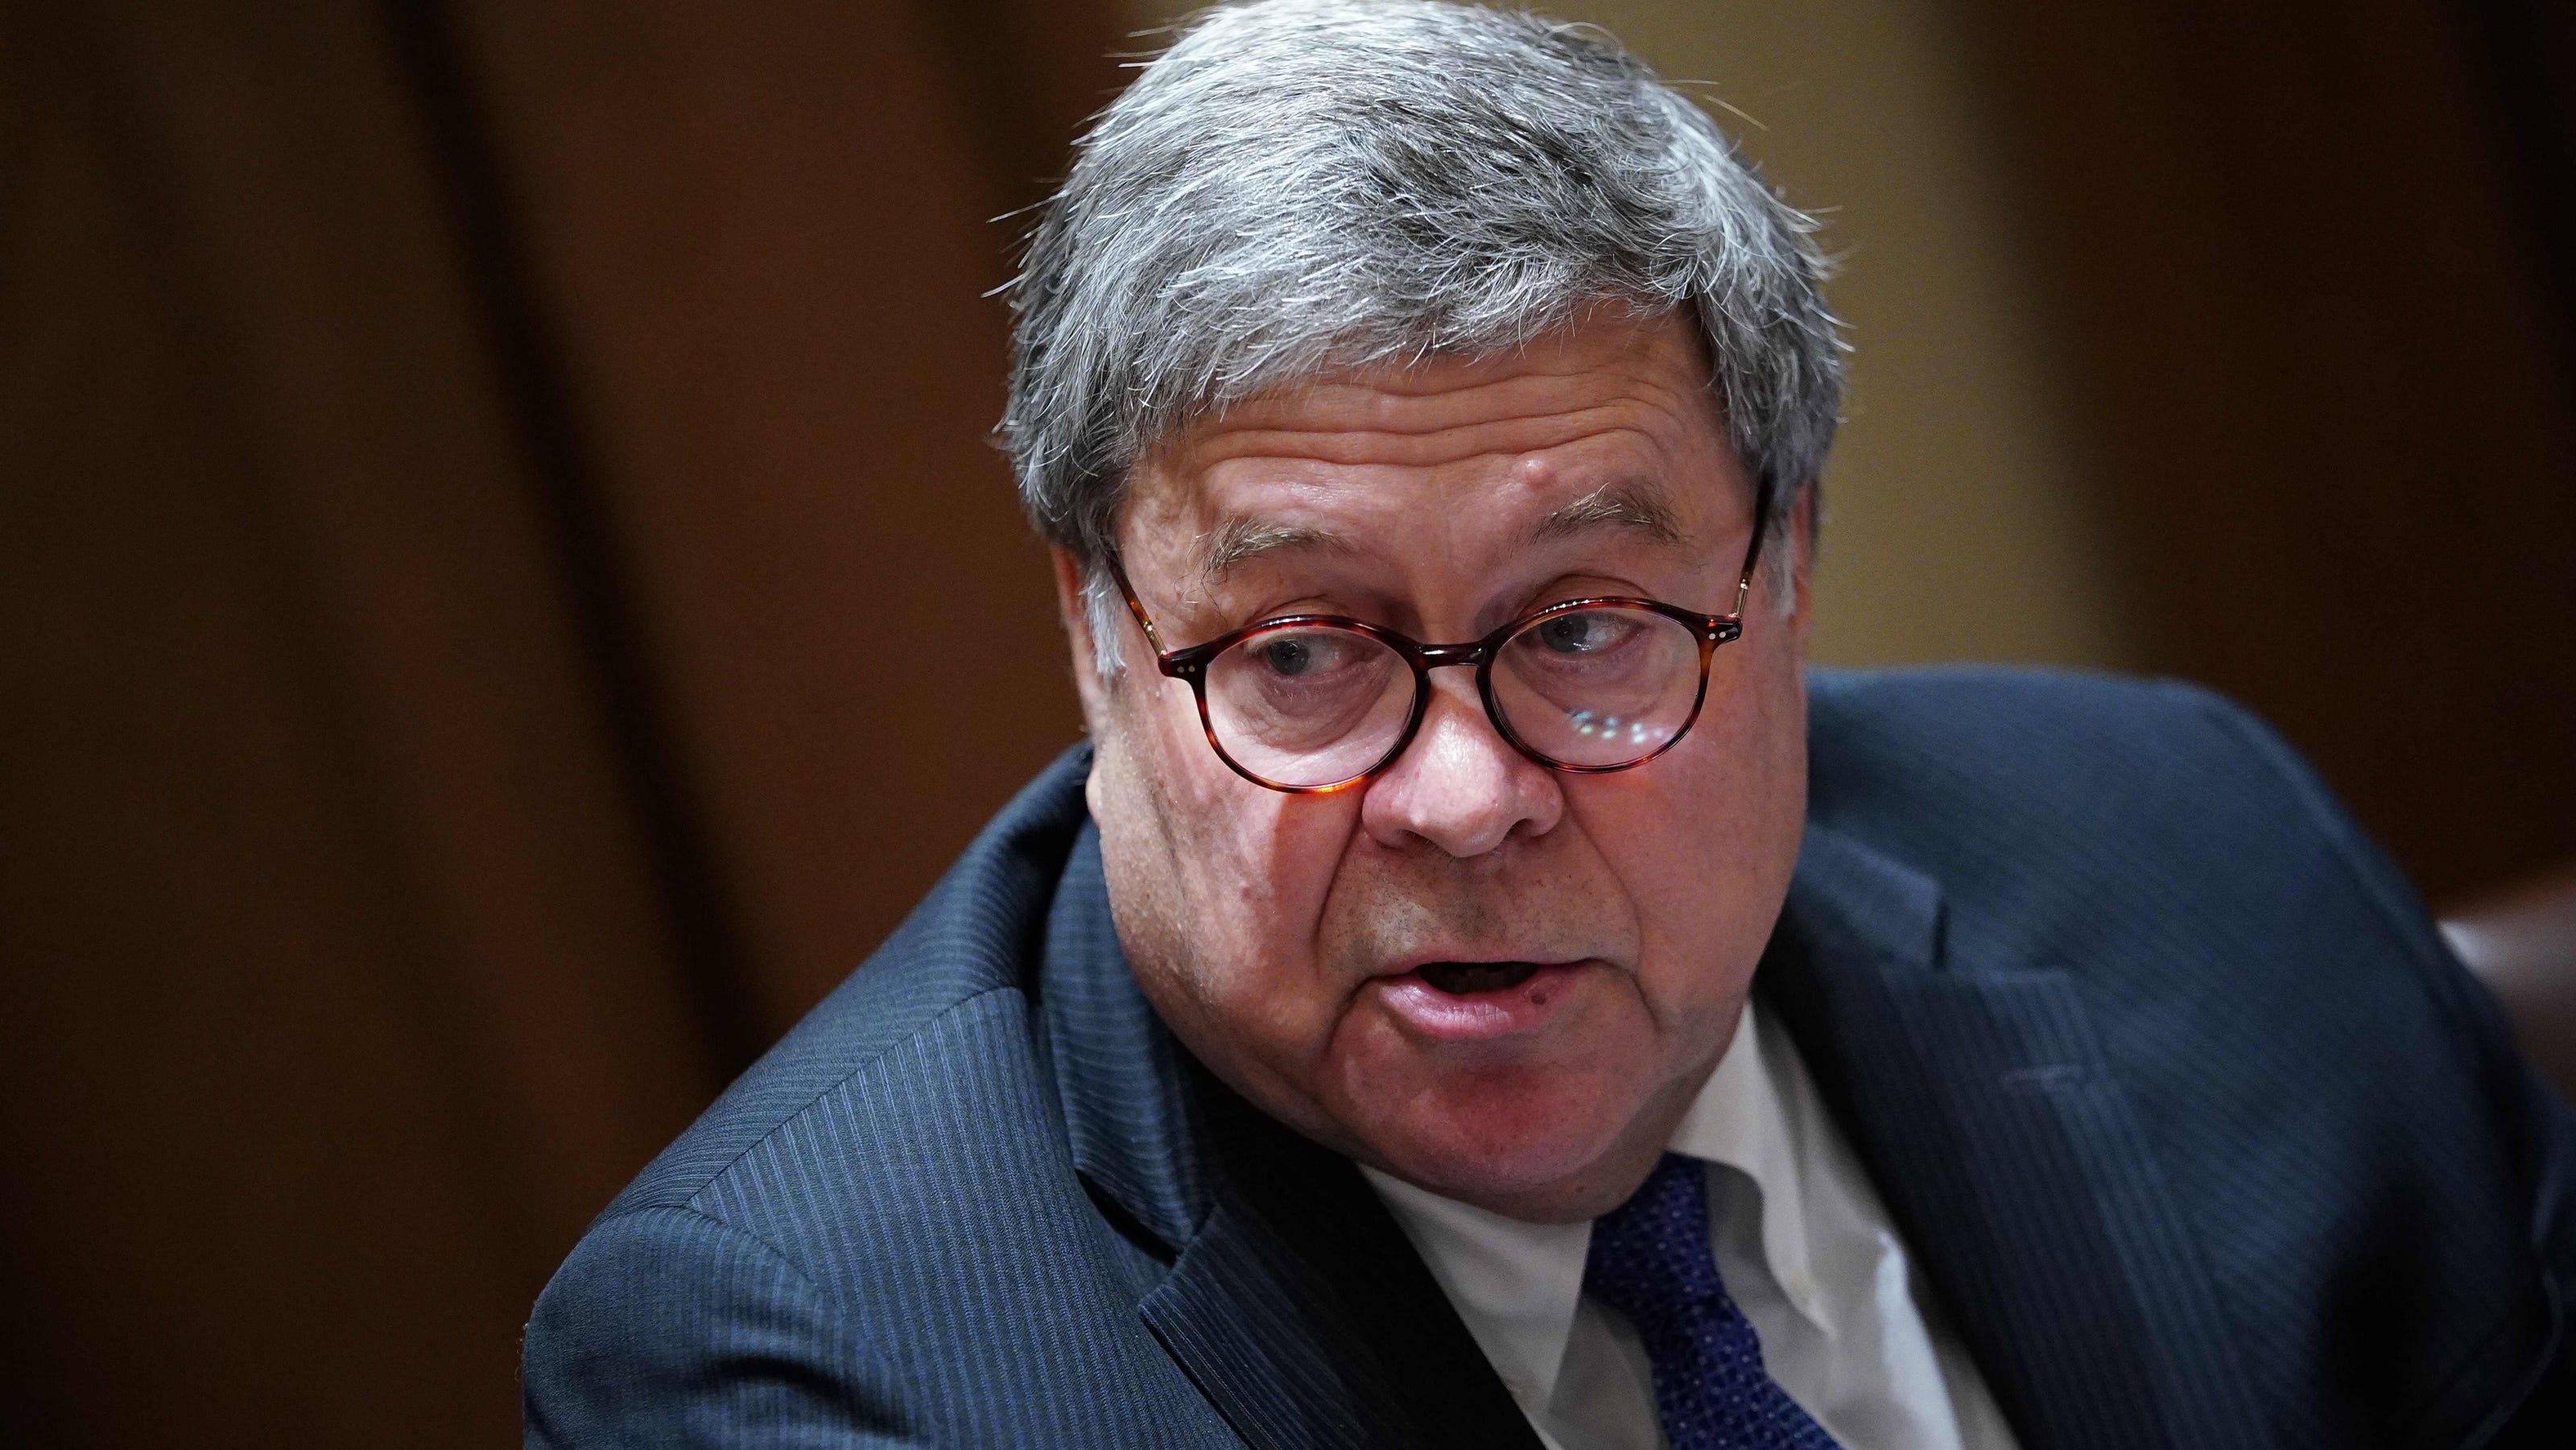 Bill Barr meets with Jan. 6 committee about Trump fraud claims